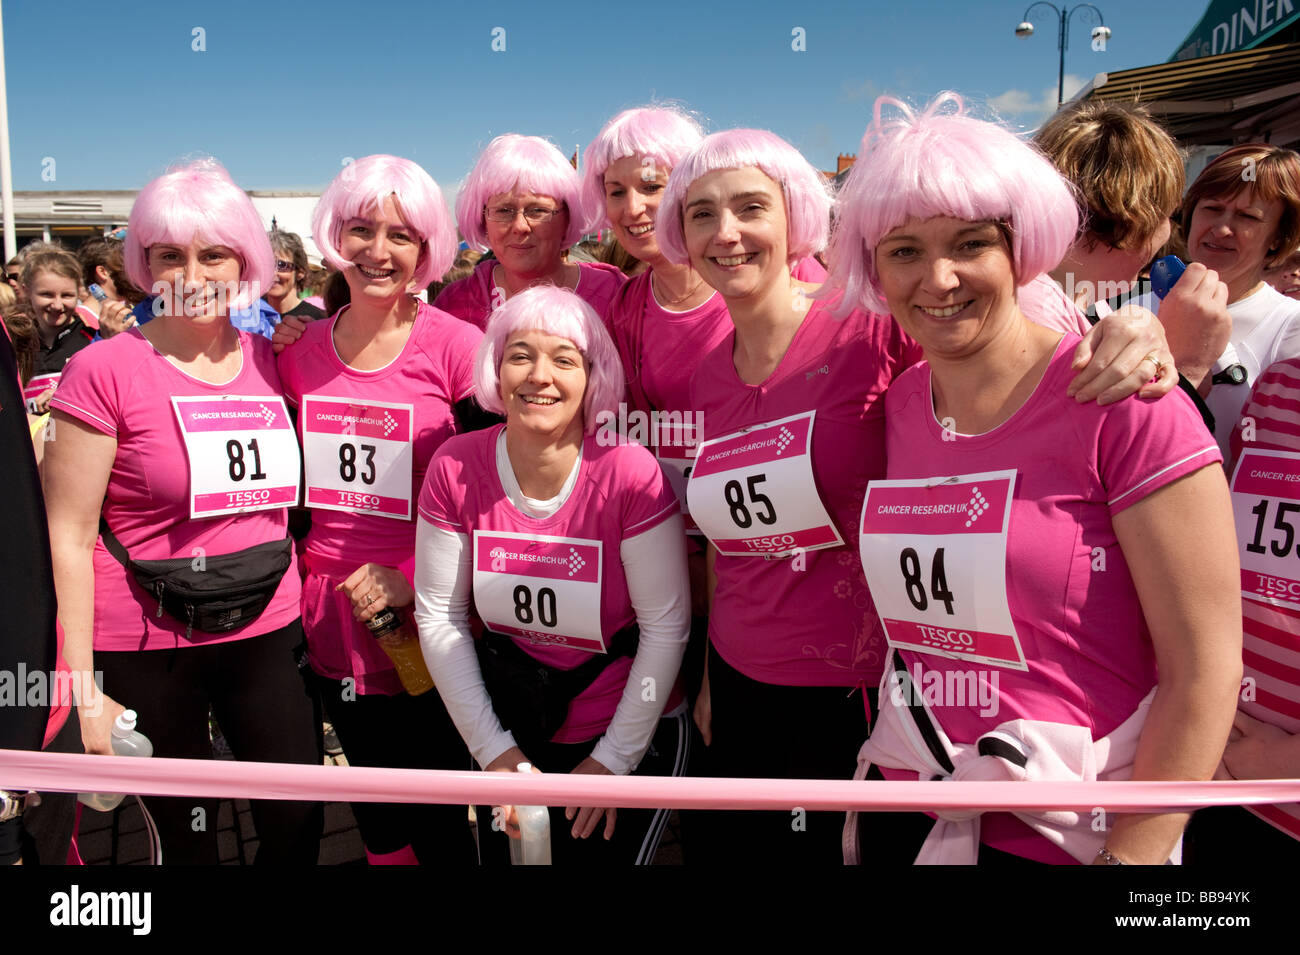 Women competing in the Race For Life sponsored run to raise money for cancer research Aberystwyth Wales UK May 2009 Stock Photo